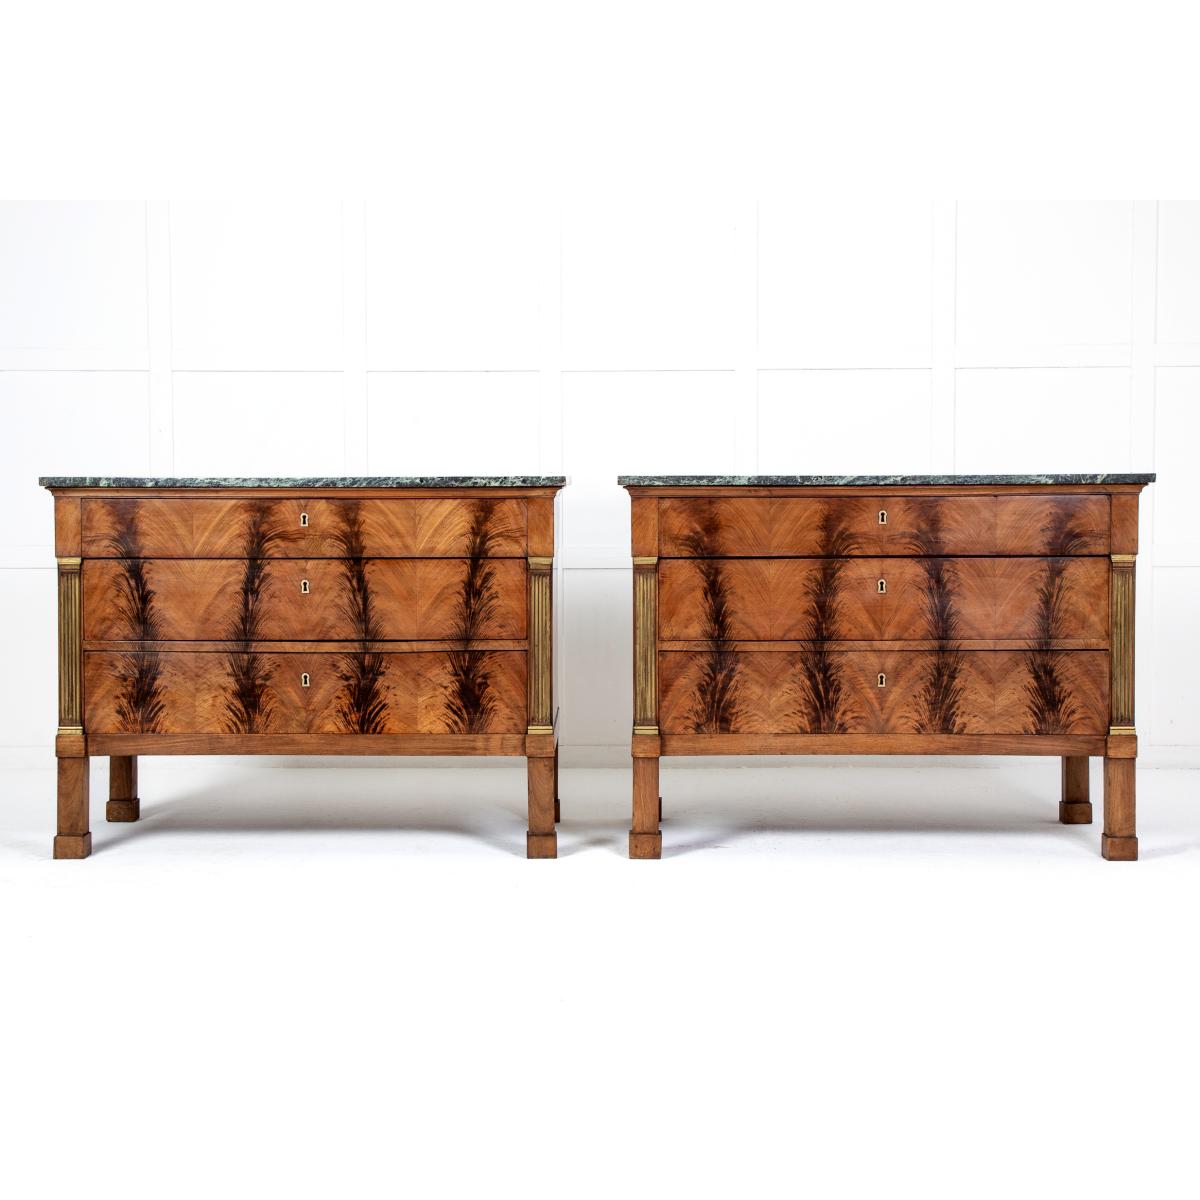 Pair of Late 18th Century Walnut Commodes